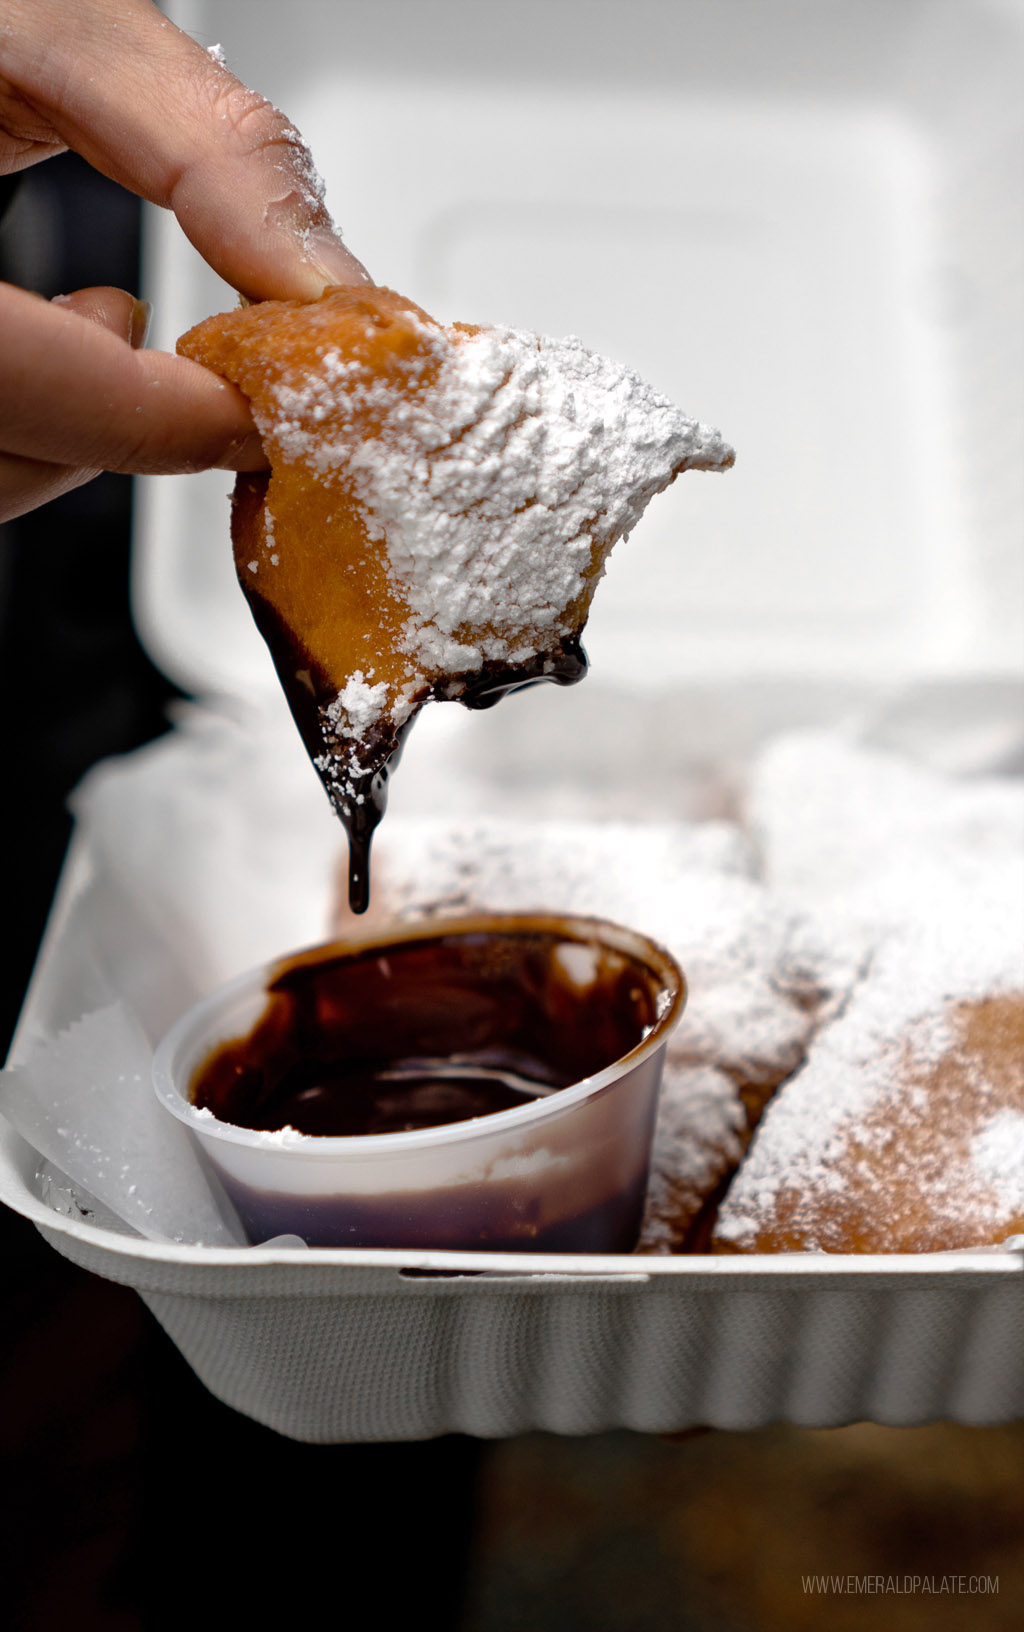 person dunking beignet into chocolate sauce